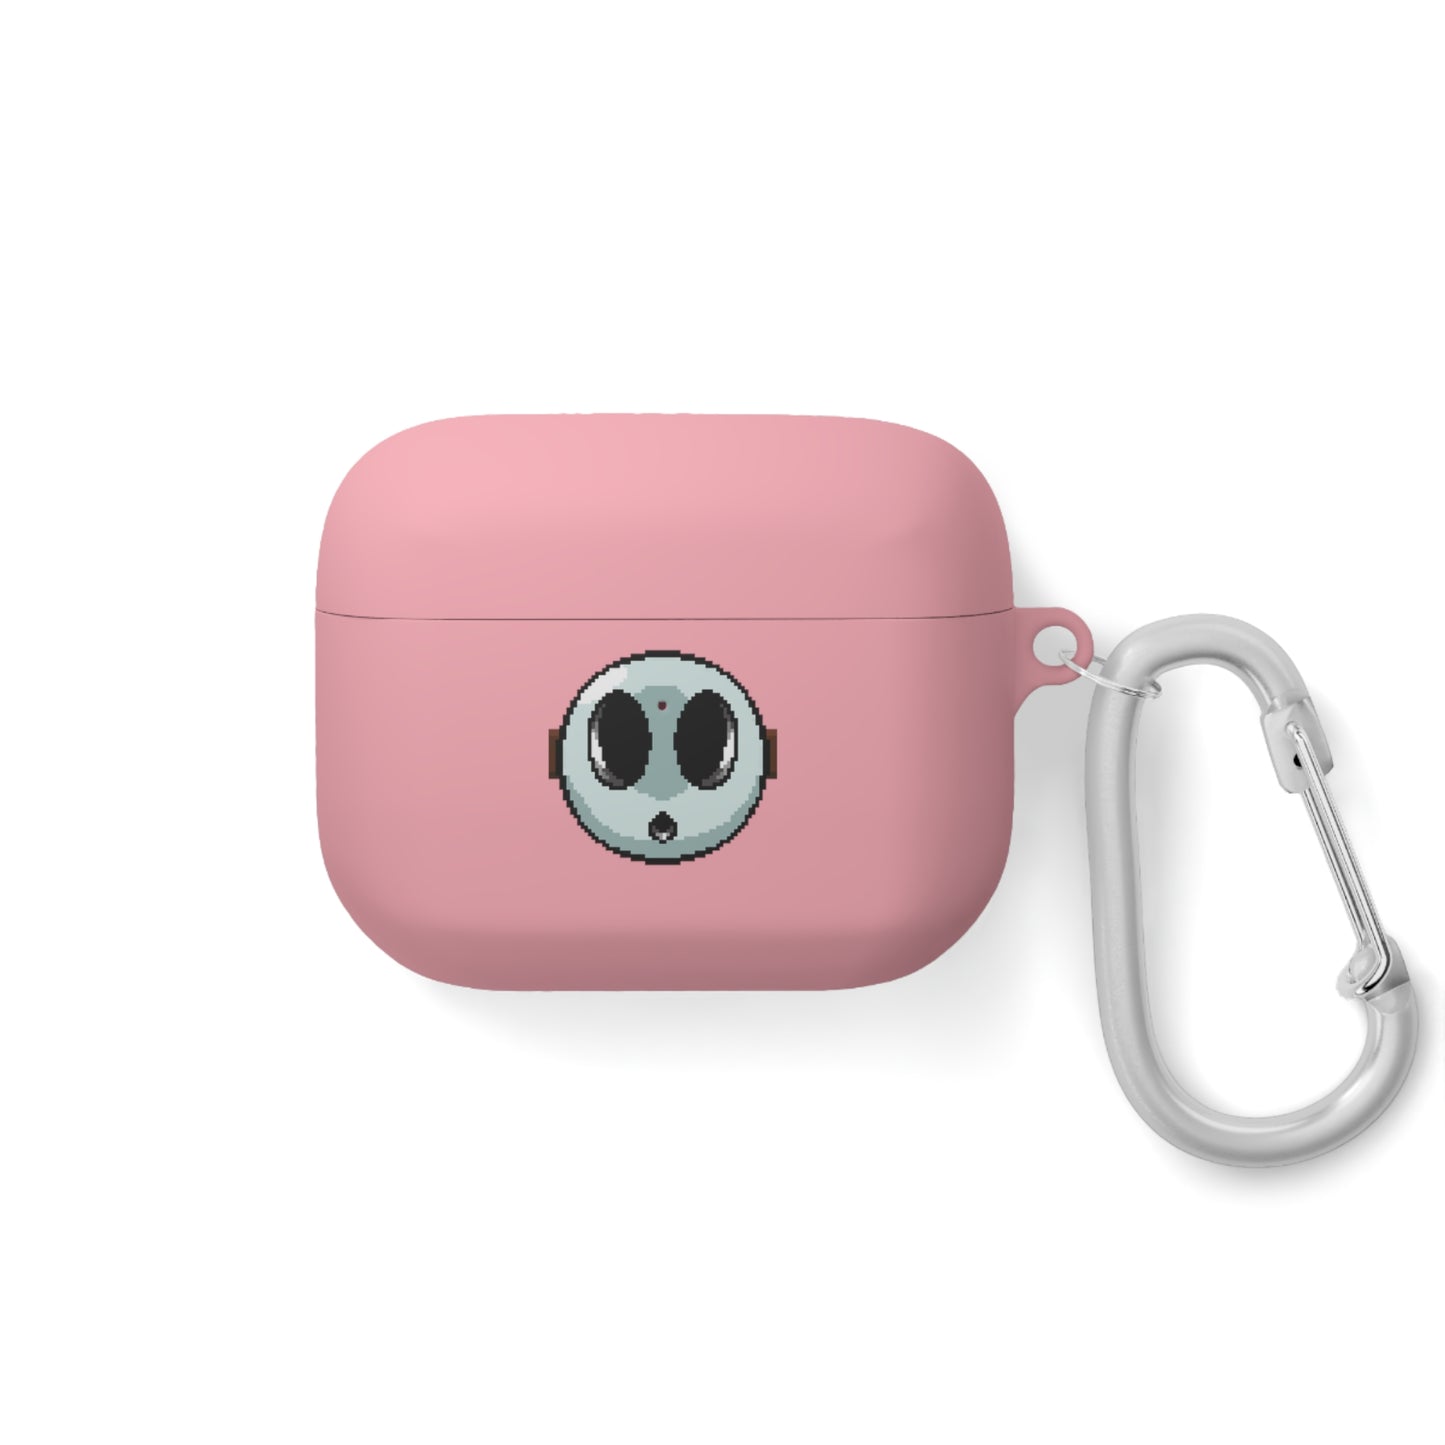 AirPods / AirPods Pro Case Cover - DBS